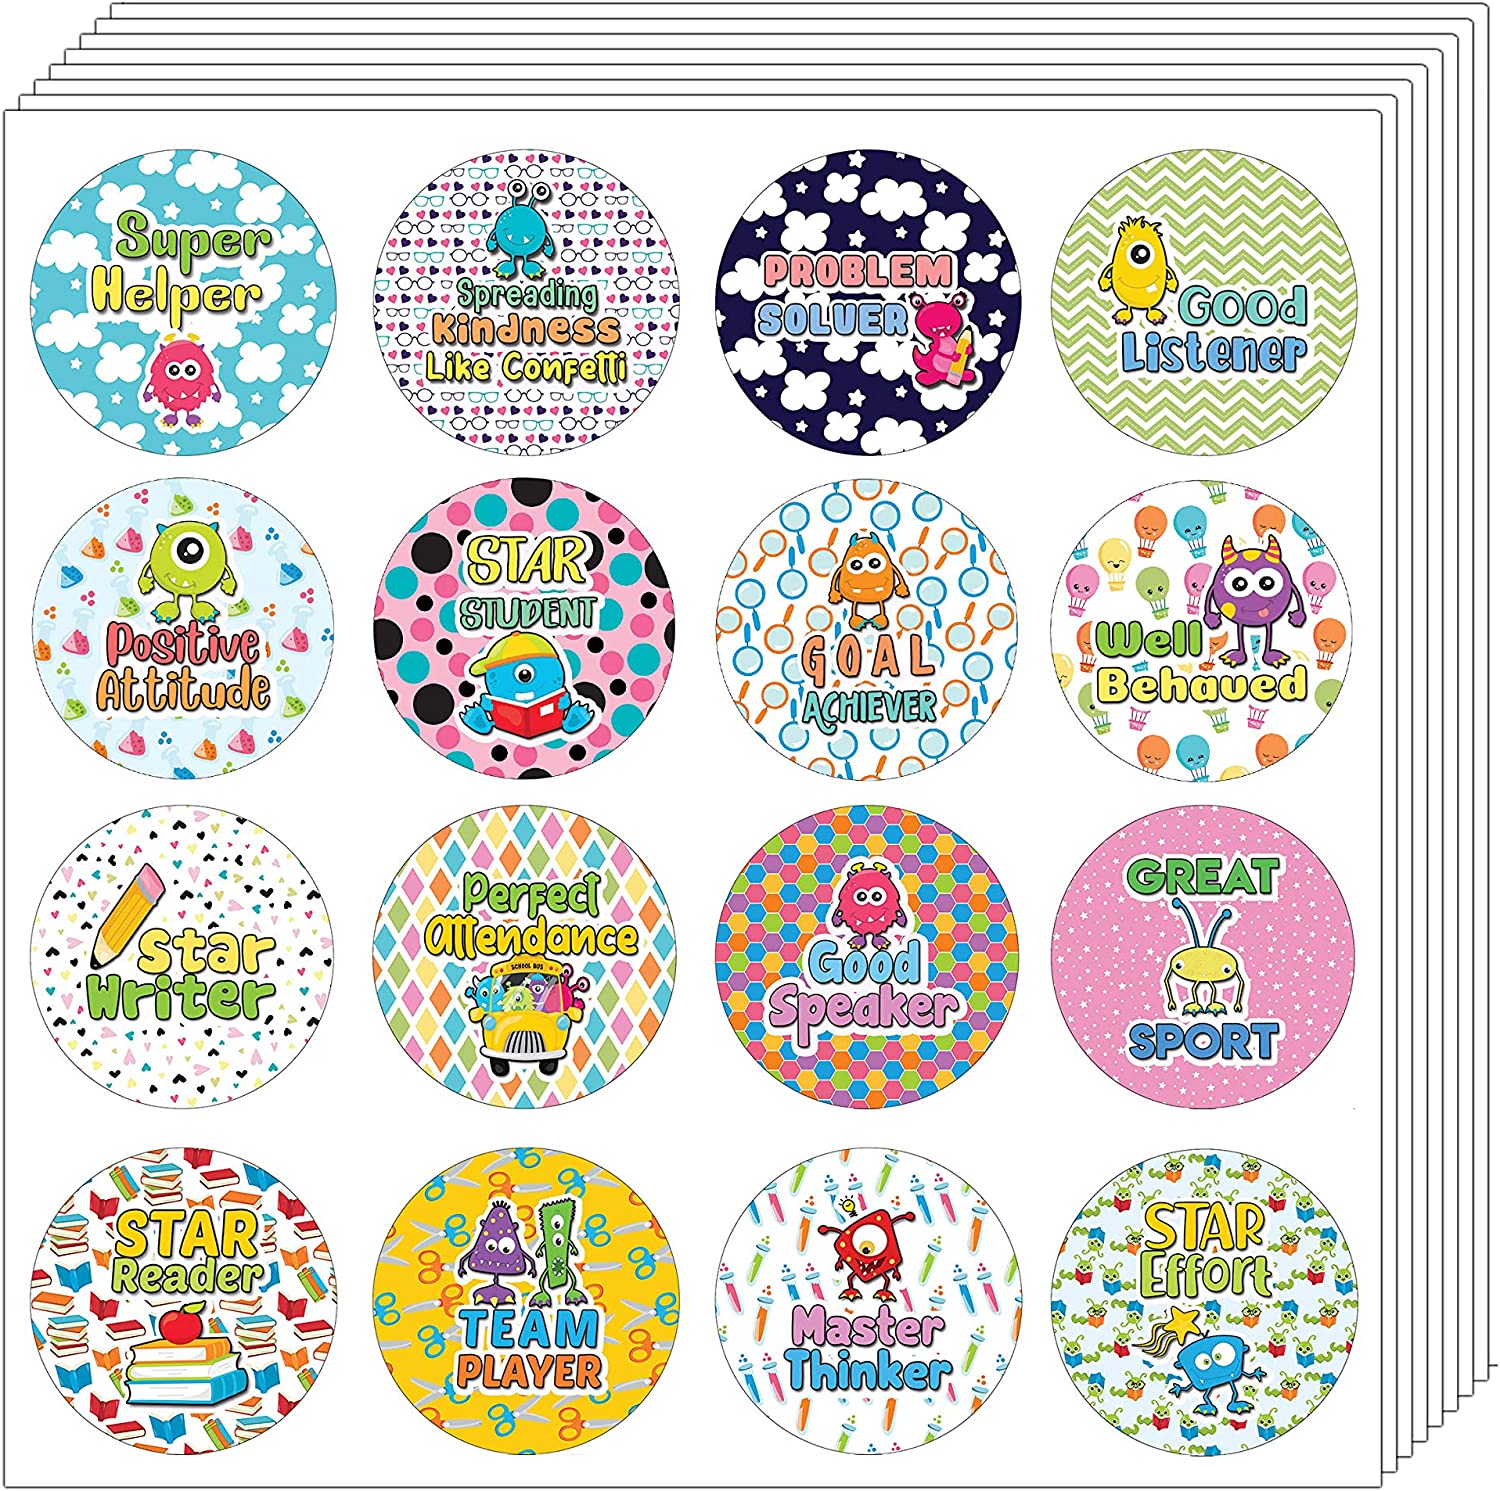 Creanoso Colorful Motivational Positive Encouragement Stickers (20-Sheet) - Premium Quality Gift Ideas for Children, Teens, & Adults for All Occasions - Stocking Stuffers Party Favor & Giveaways